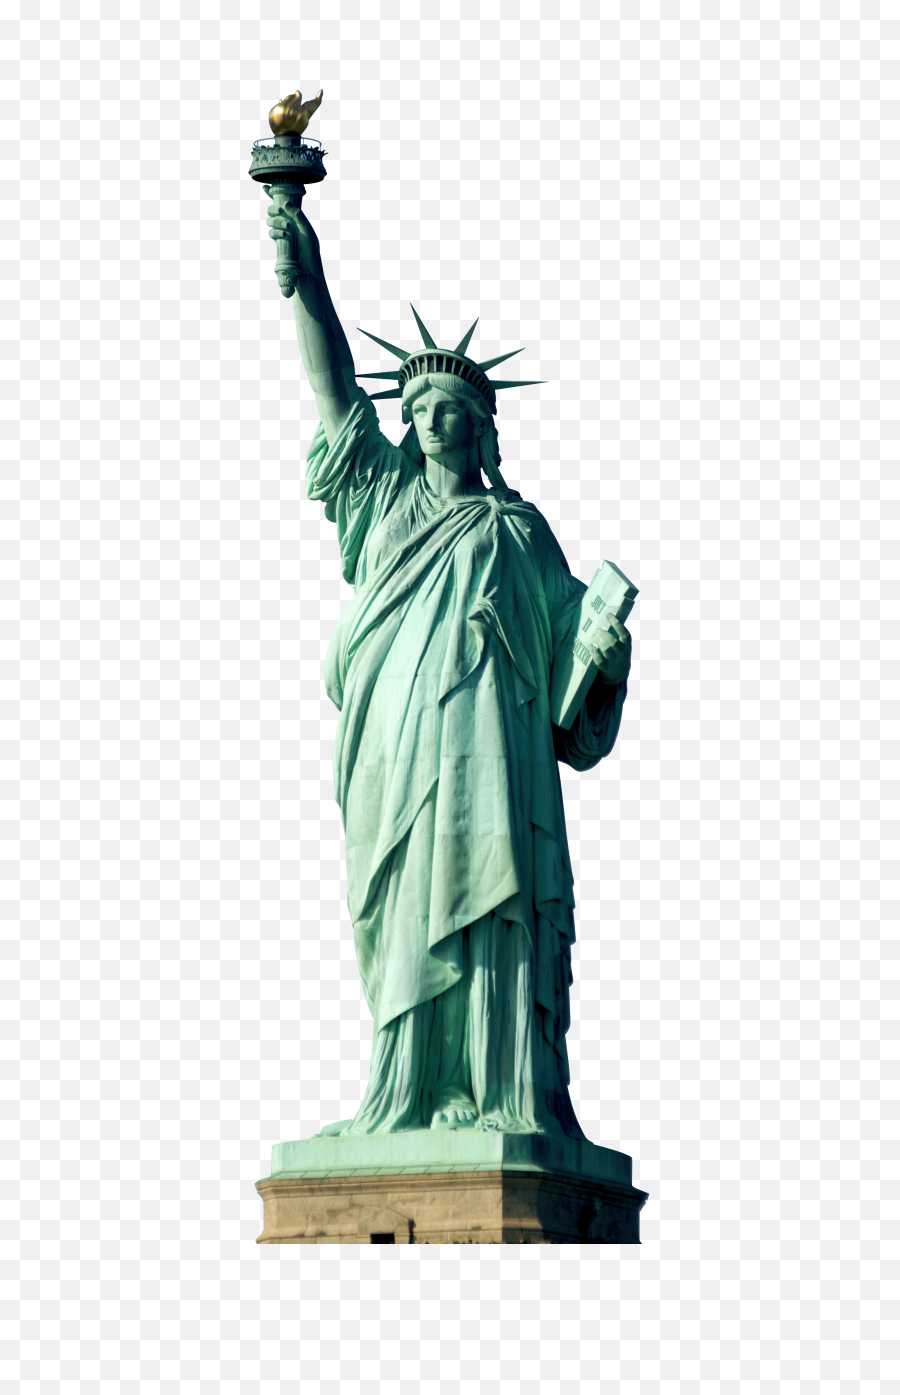 Statue Of Liberty Png Transparent Image - Statue Of Liberty,Statue Of Liberty Transparent